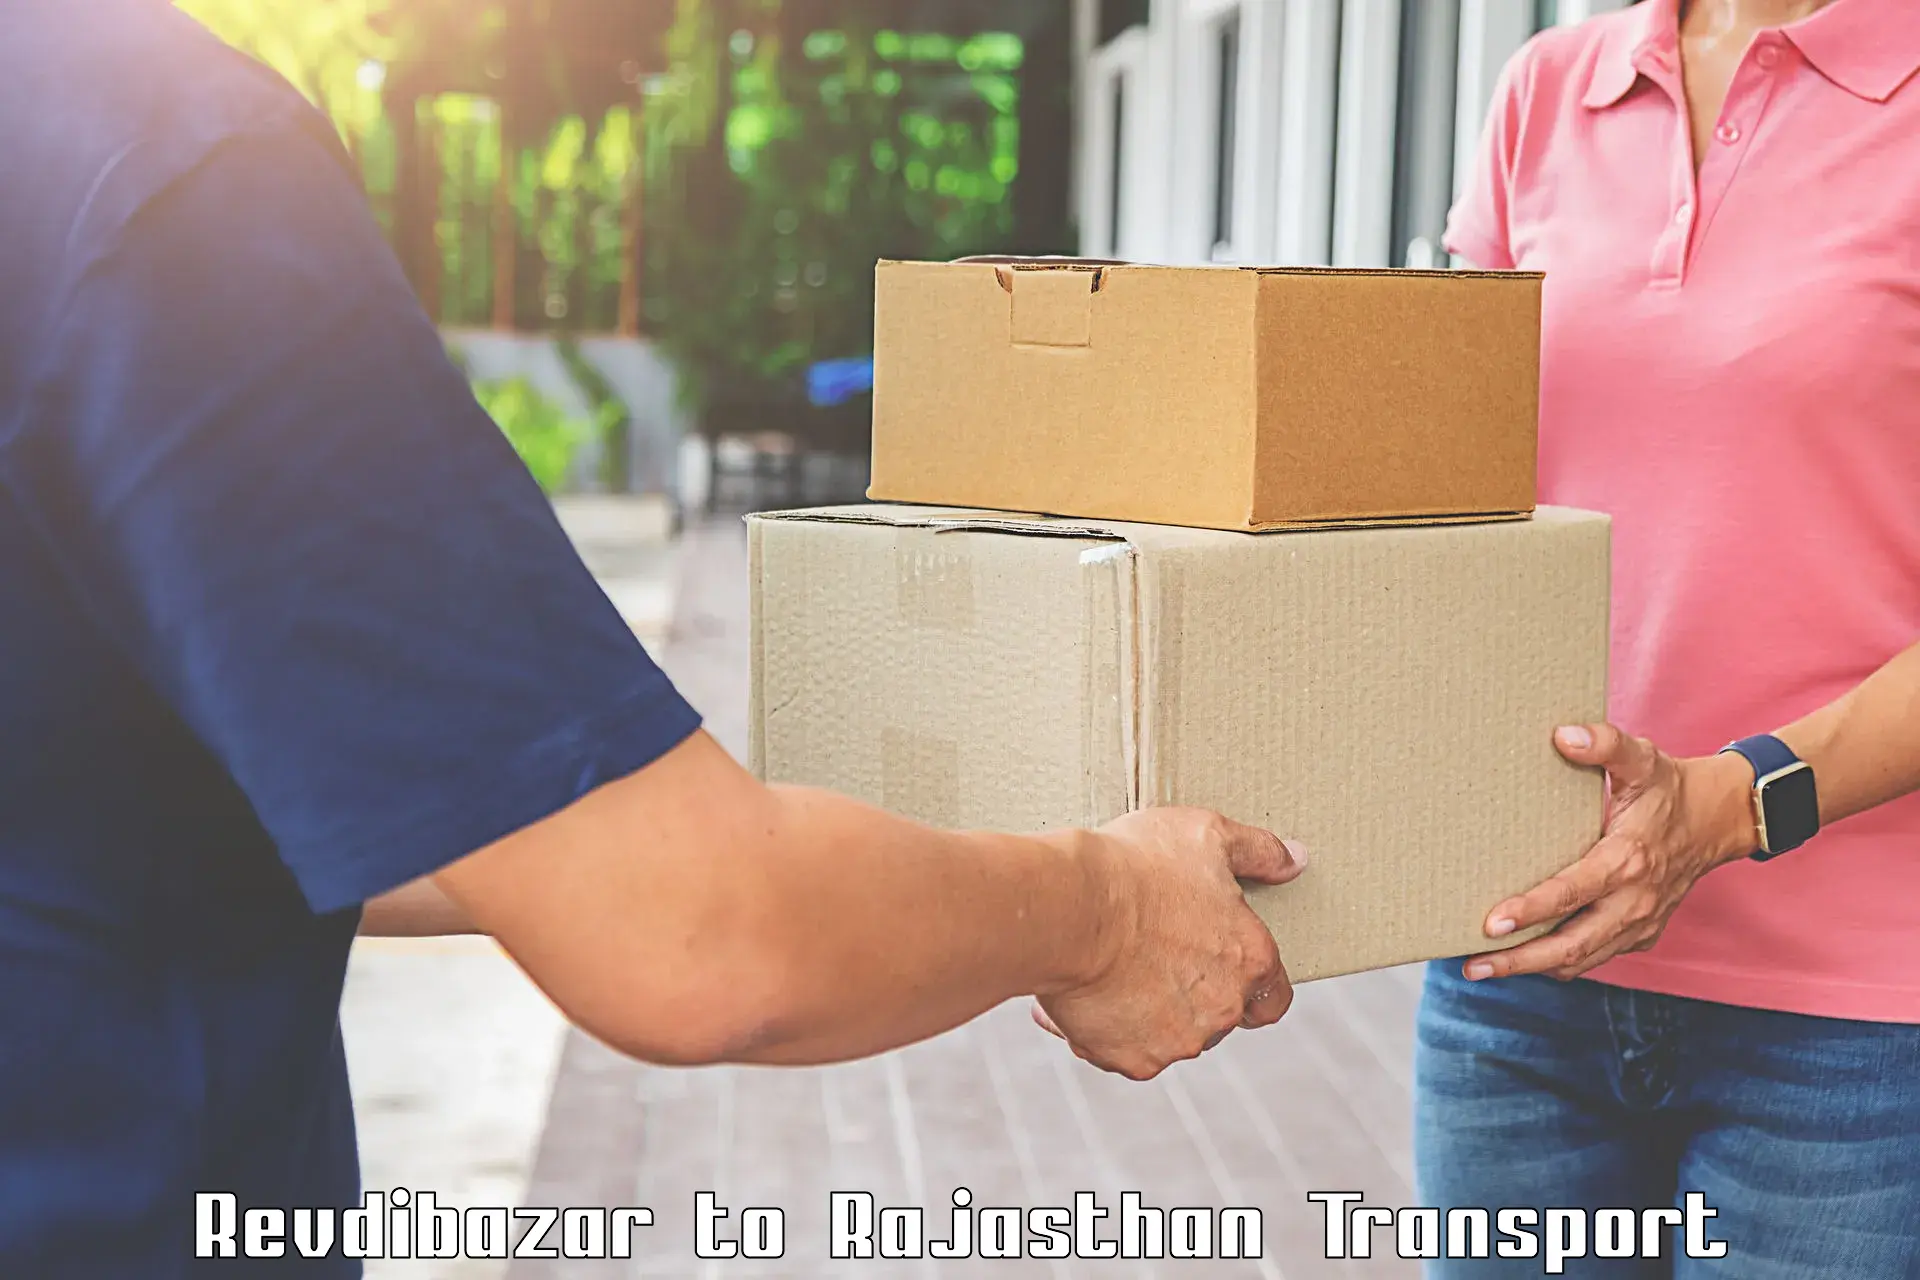 Shipping partner Revdibazar to Yeswanthapur